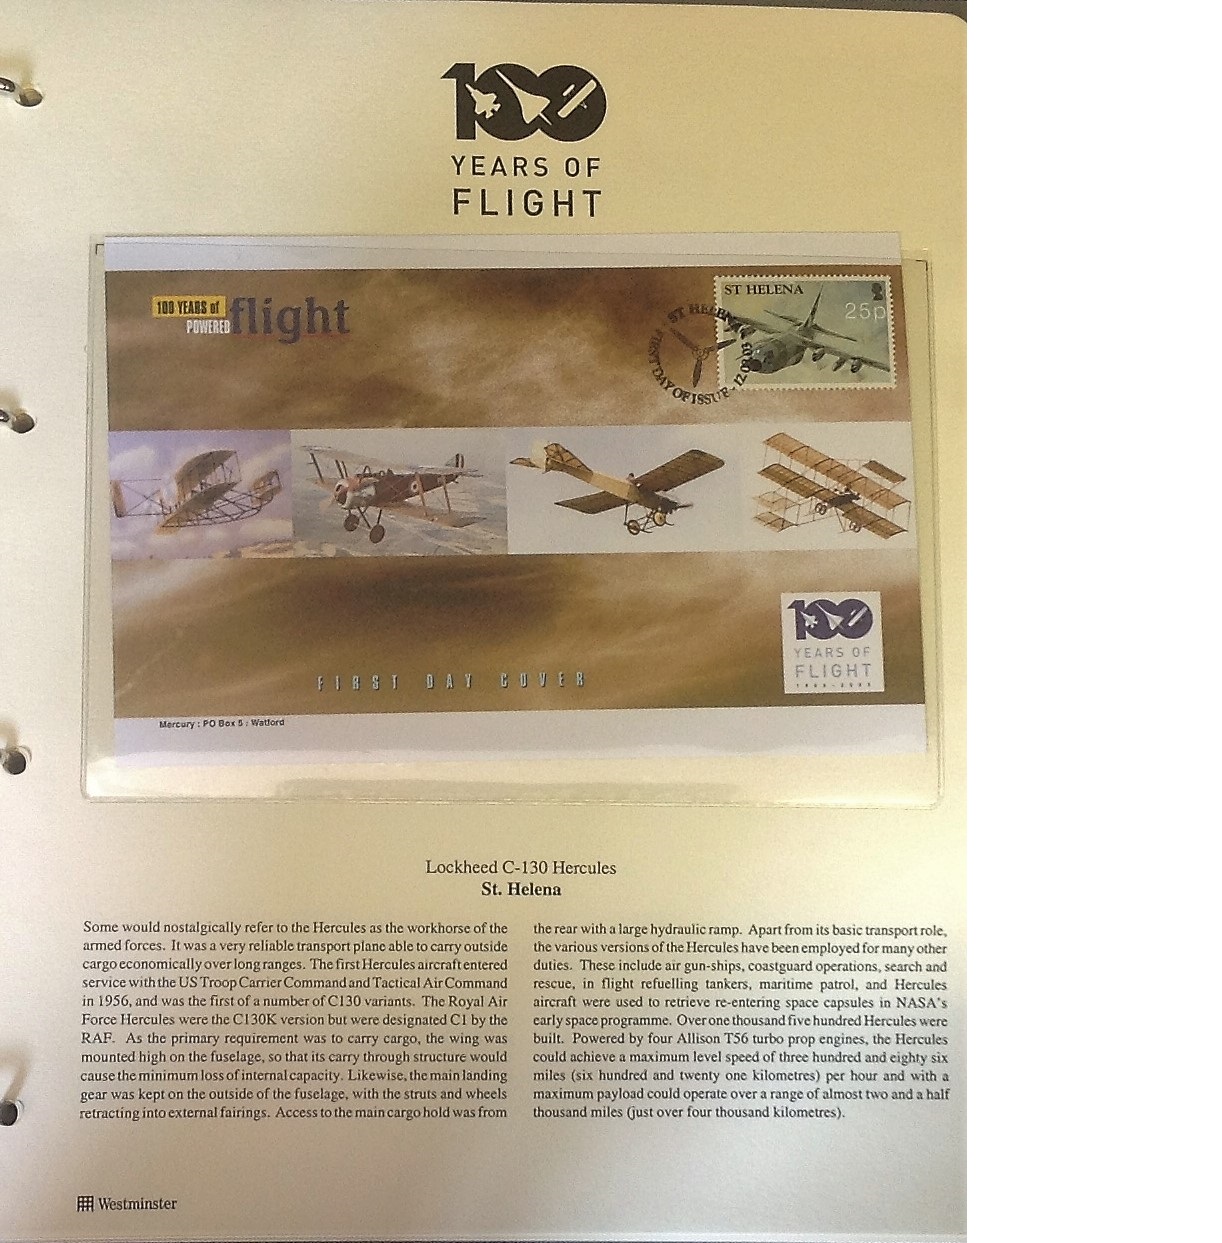 Aviation collection 100 years of flight includes 23 FDC and Coin covers featuring iconic planes - Image 2 of 8